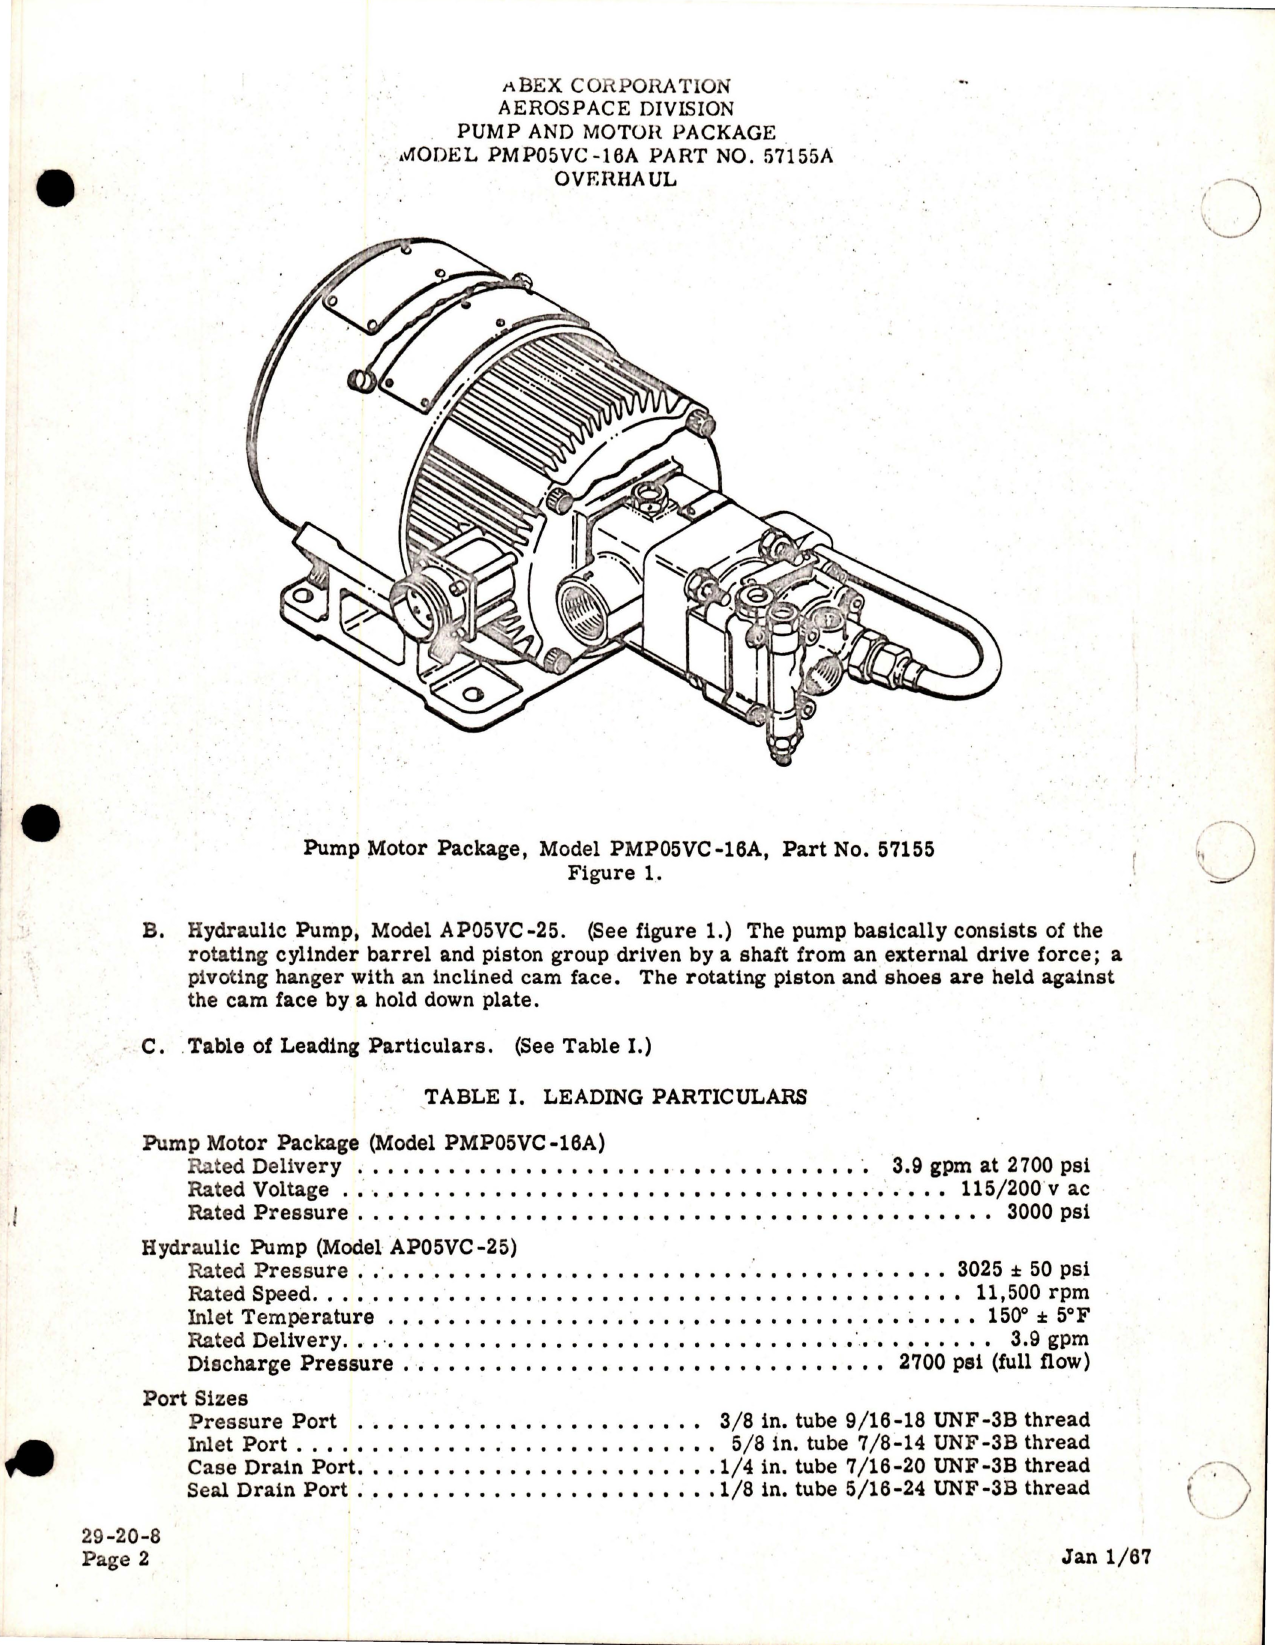 Sample page 5 from AirCorps Library document: Overhaul Manual for Hydraulic Pump and Motor Package - Part 57155A - Model PMP05VC-16A 